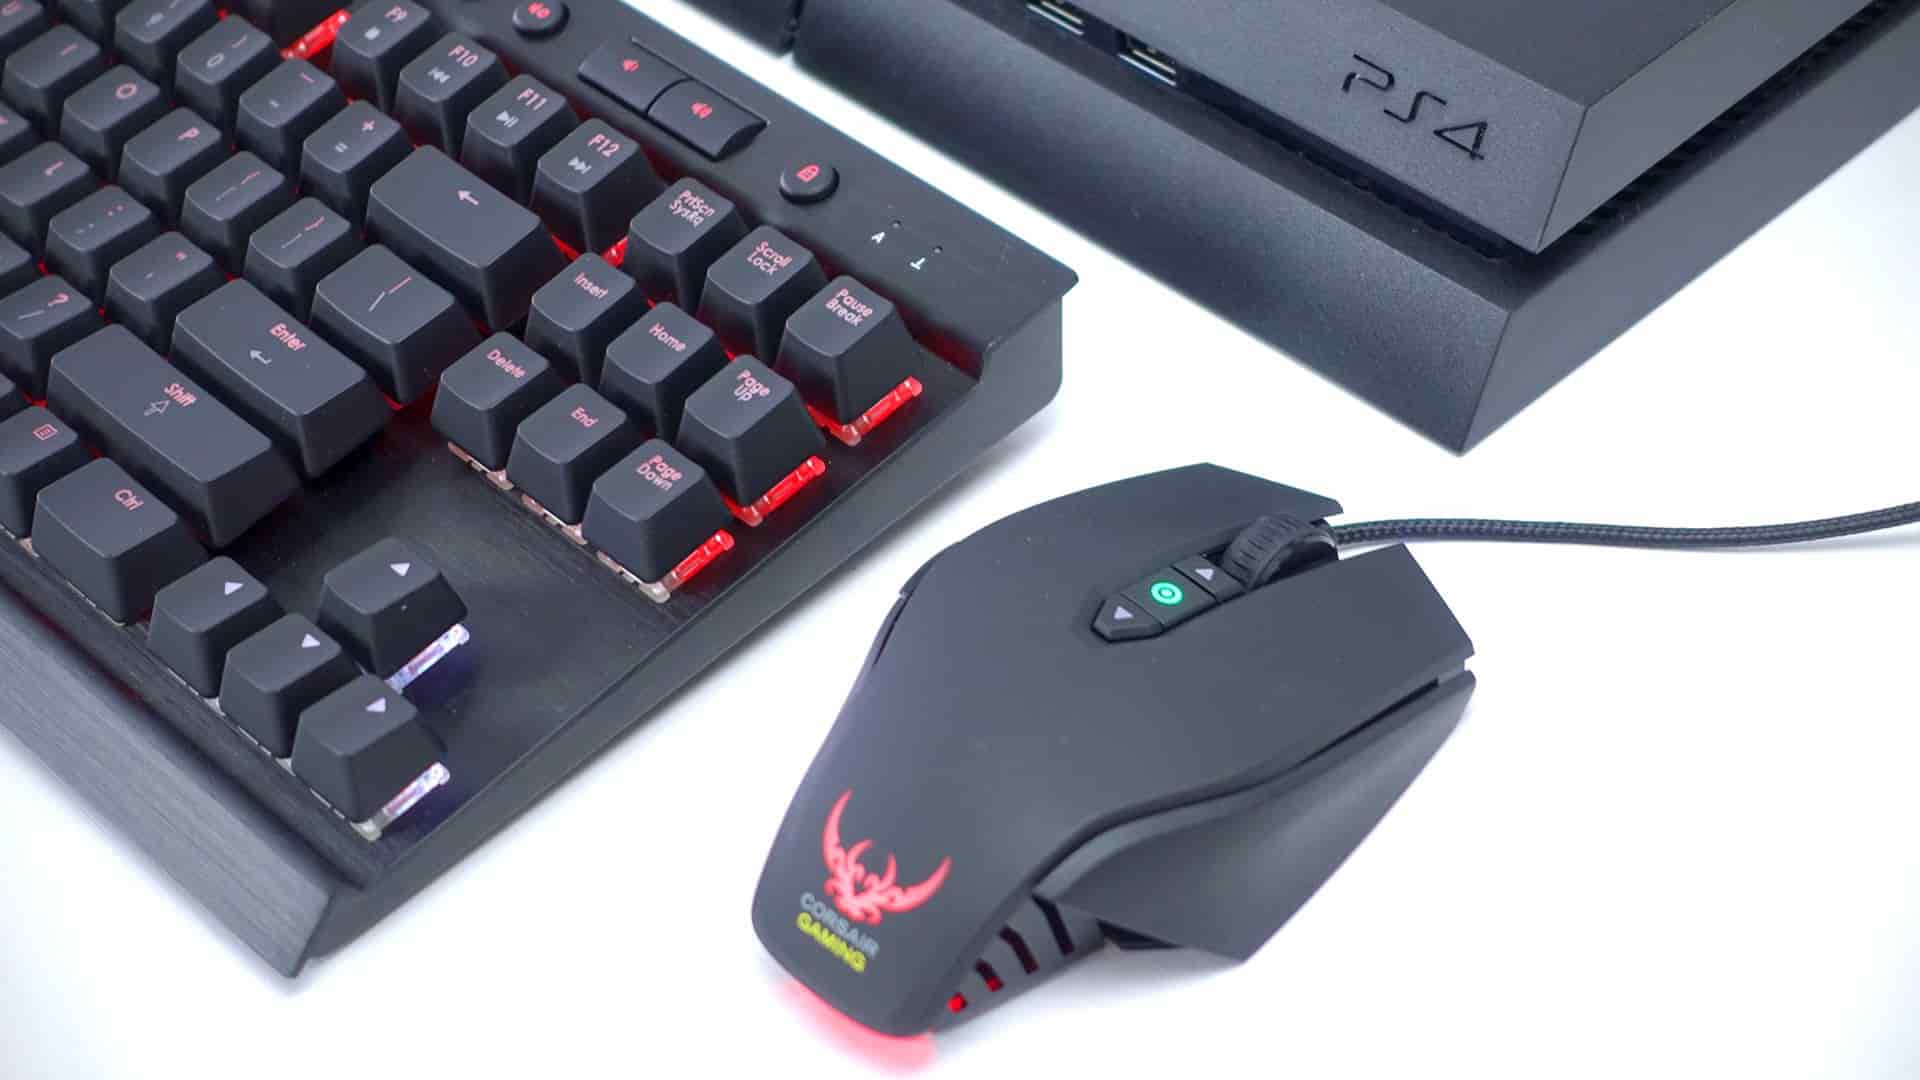 How To Use Keyboard And Mouse On PS4, And Which Games Are Compatible - Universe